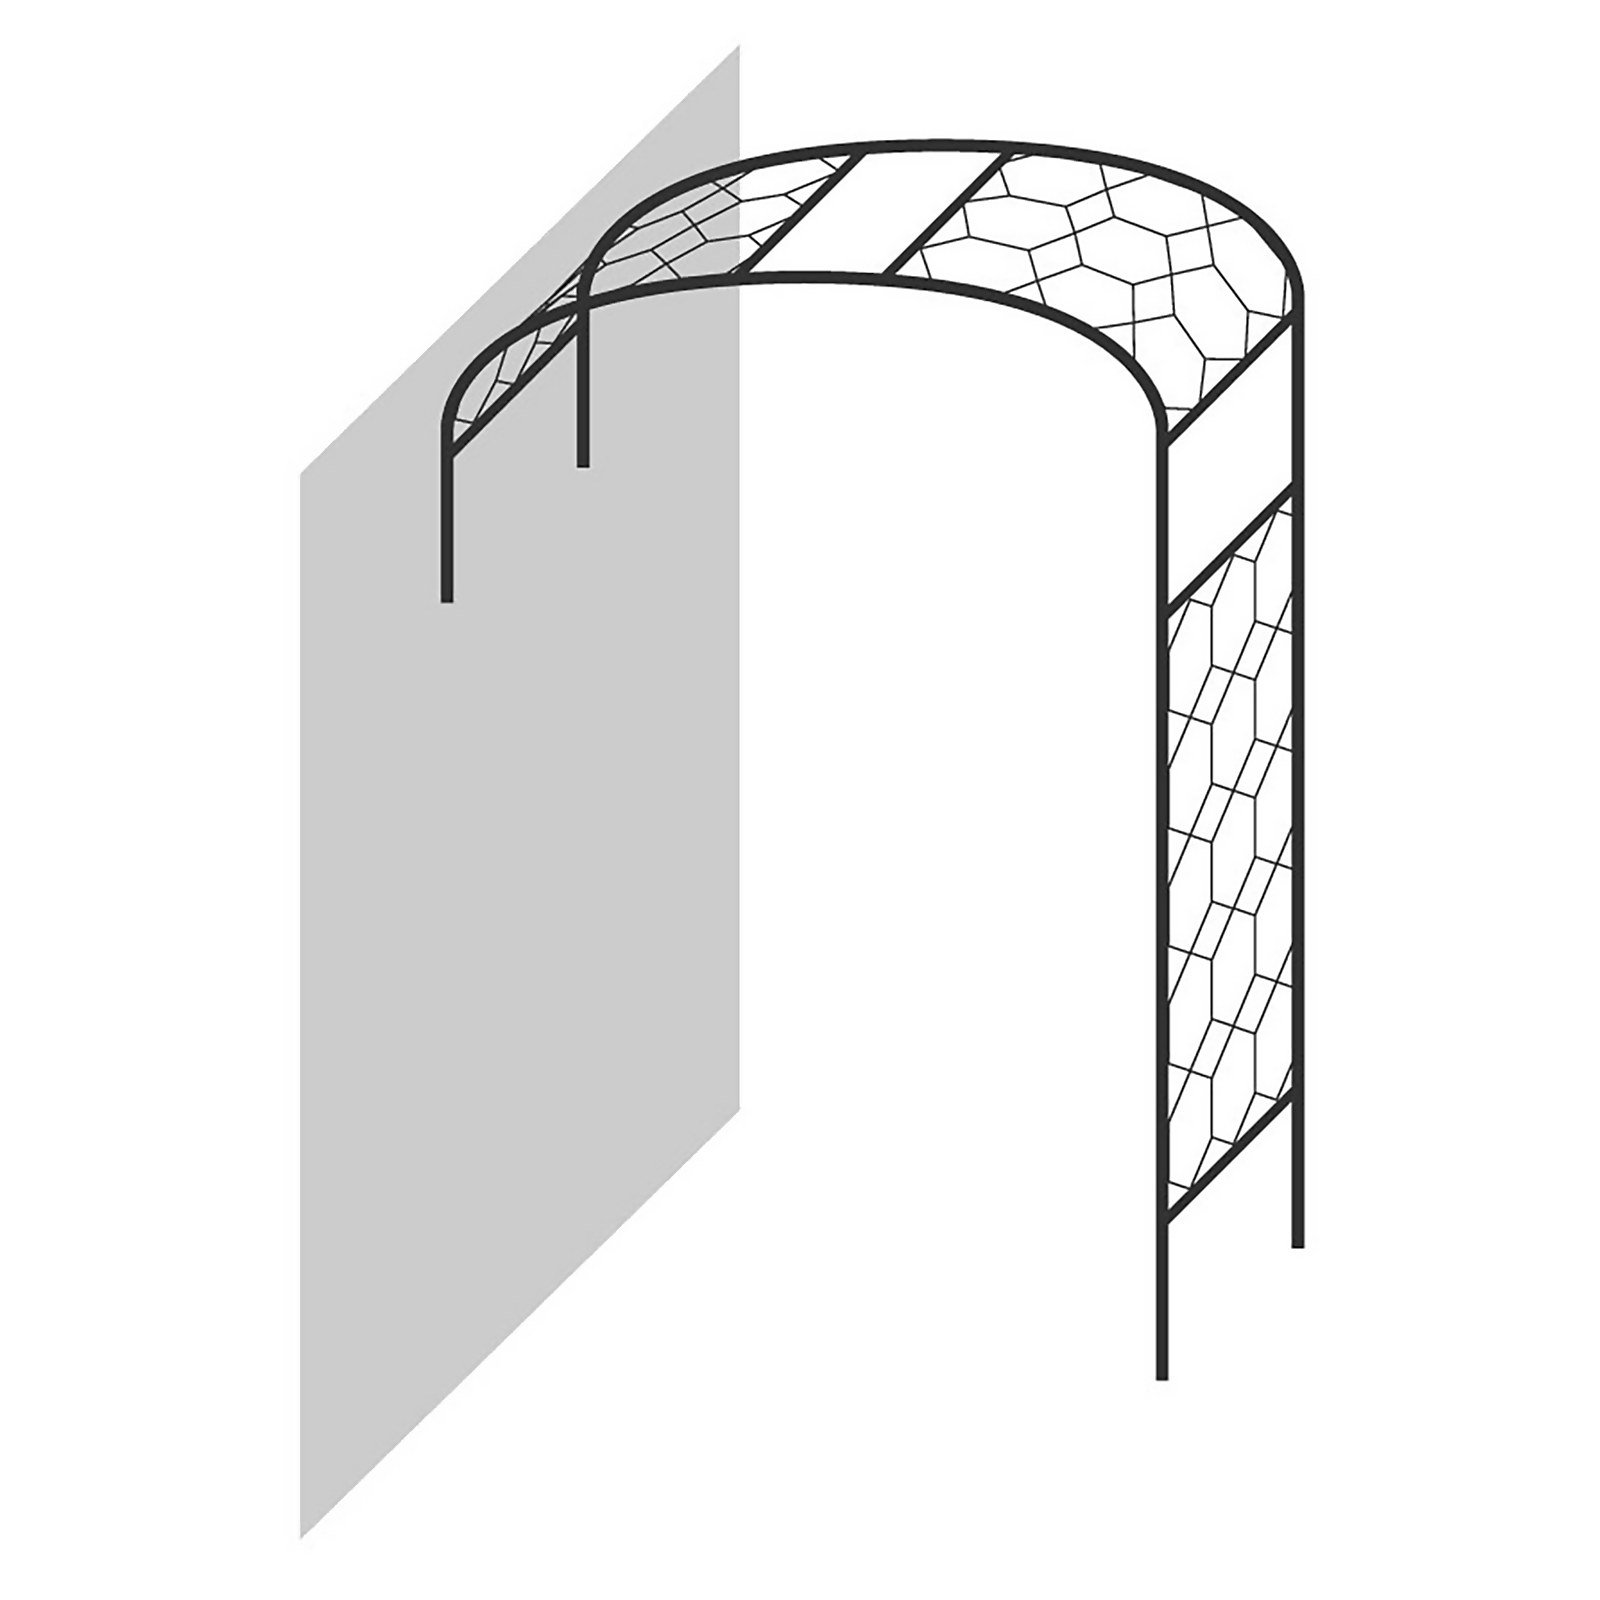 Photo of Agriframes Wall Arch - -w- 1.8m X -h- 2.3m - Black